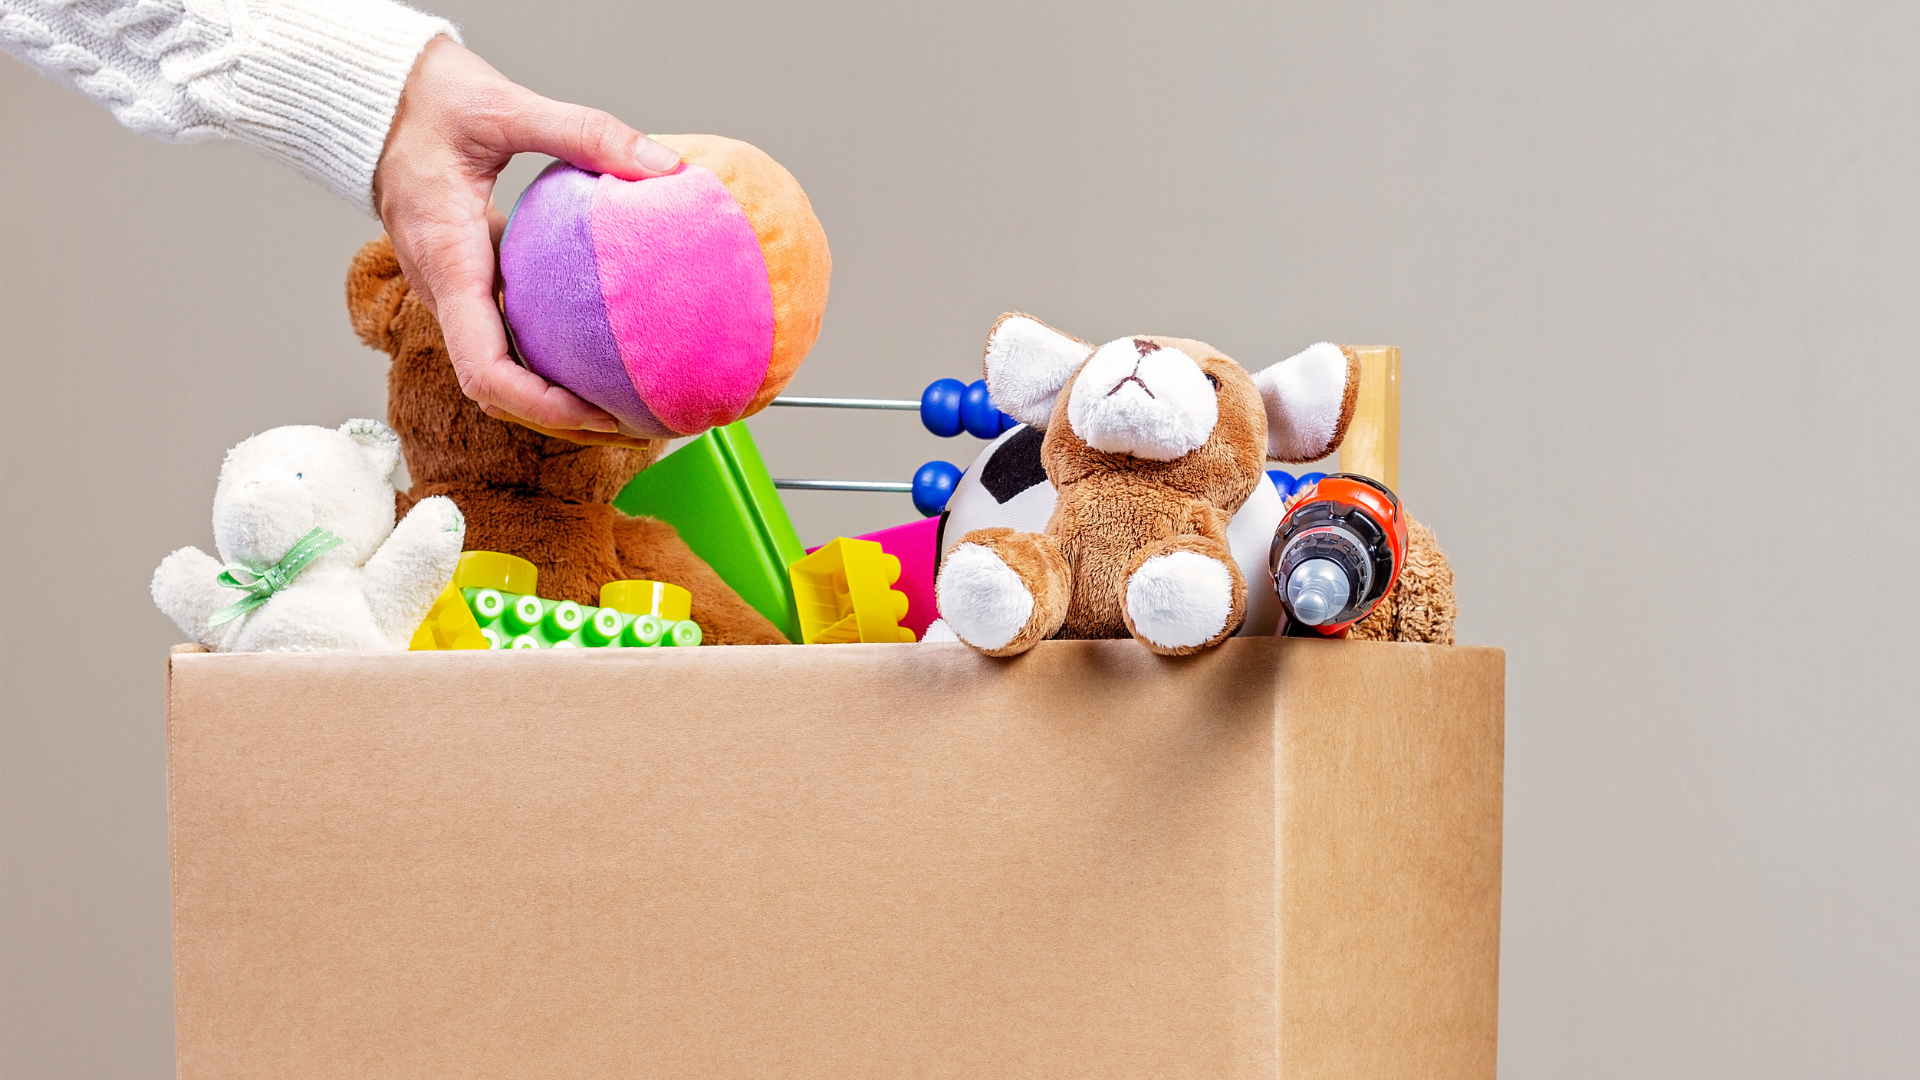 a hand placing a stuffed ball into a cardboard box overflowing with toys